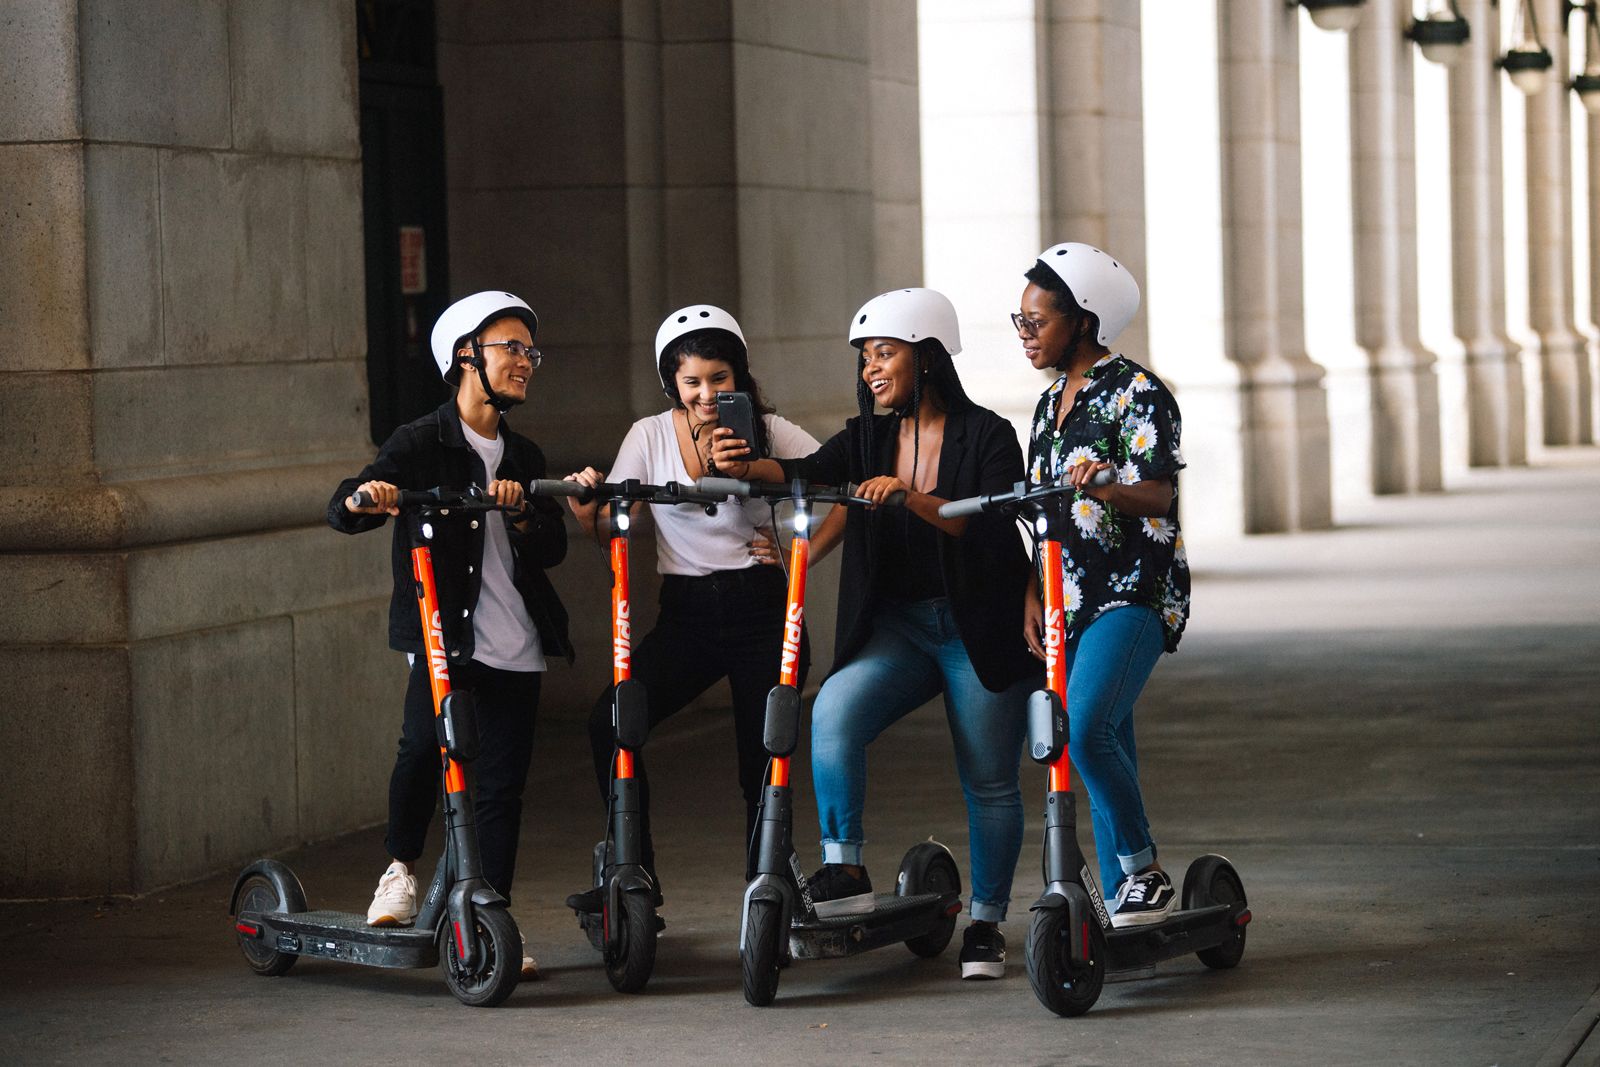 xiaomi mi electric scooter now available in uk but heres why you cant ride it photo 2